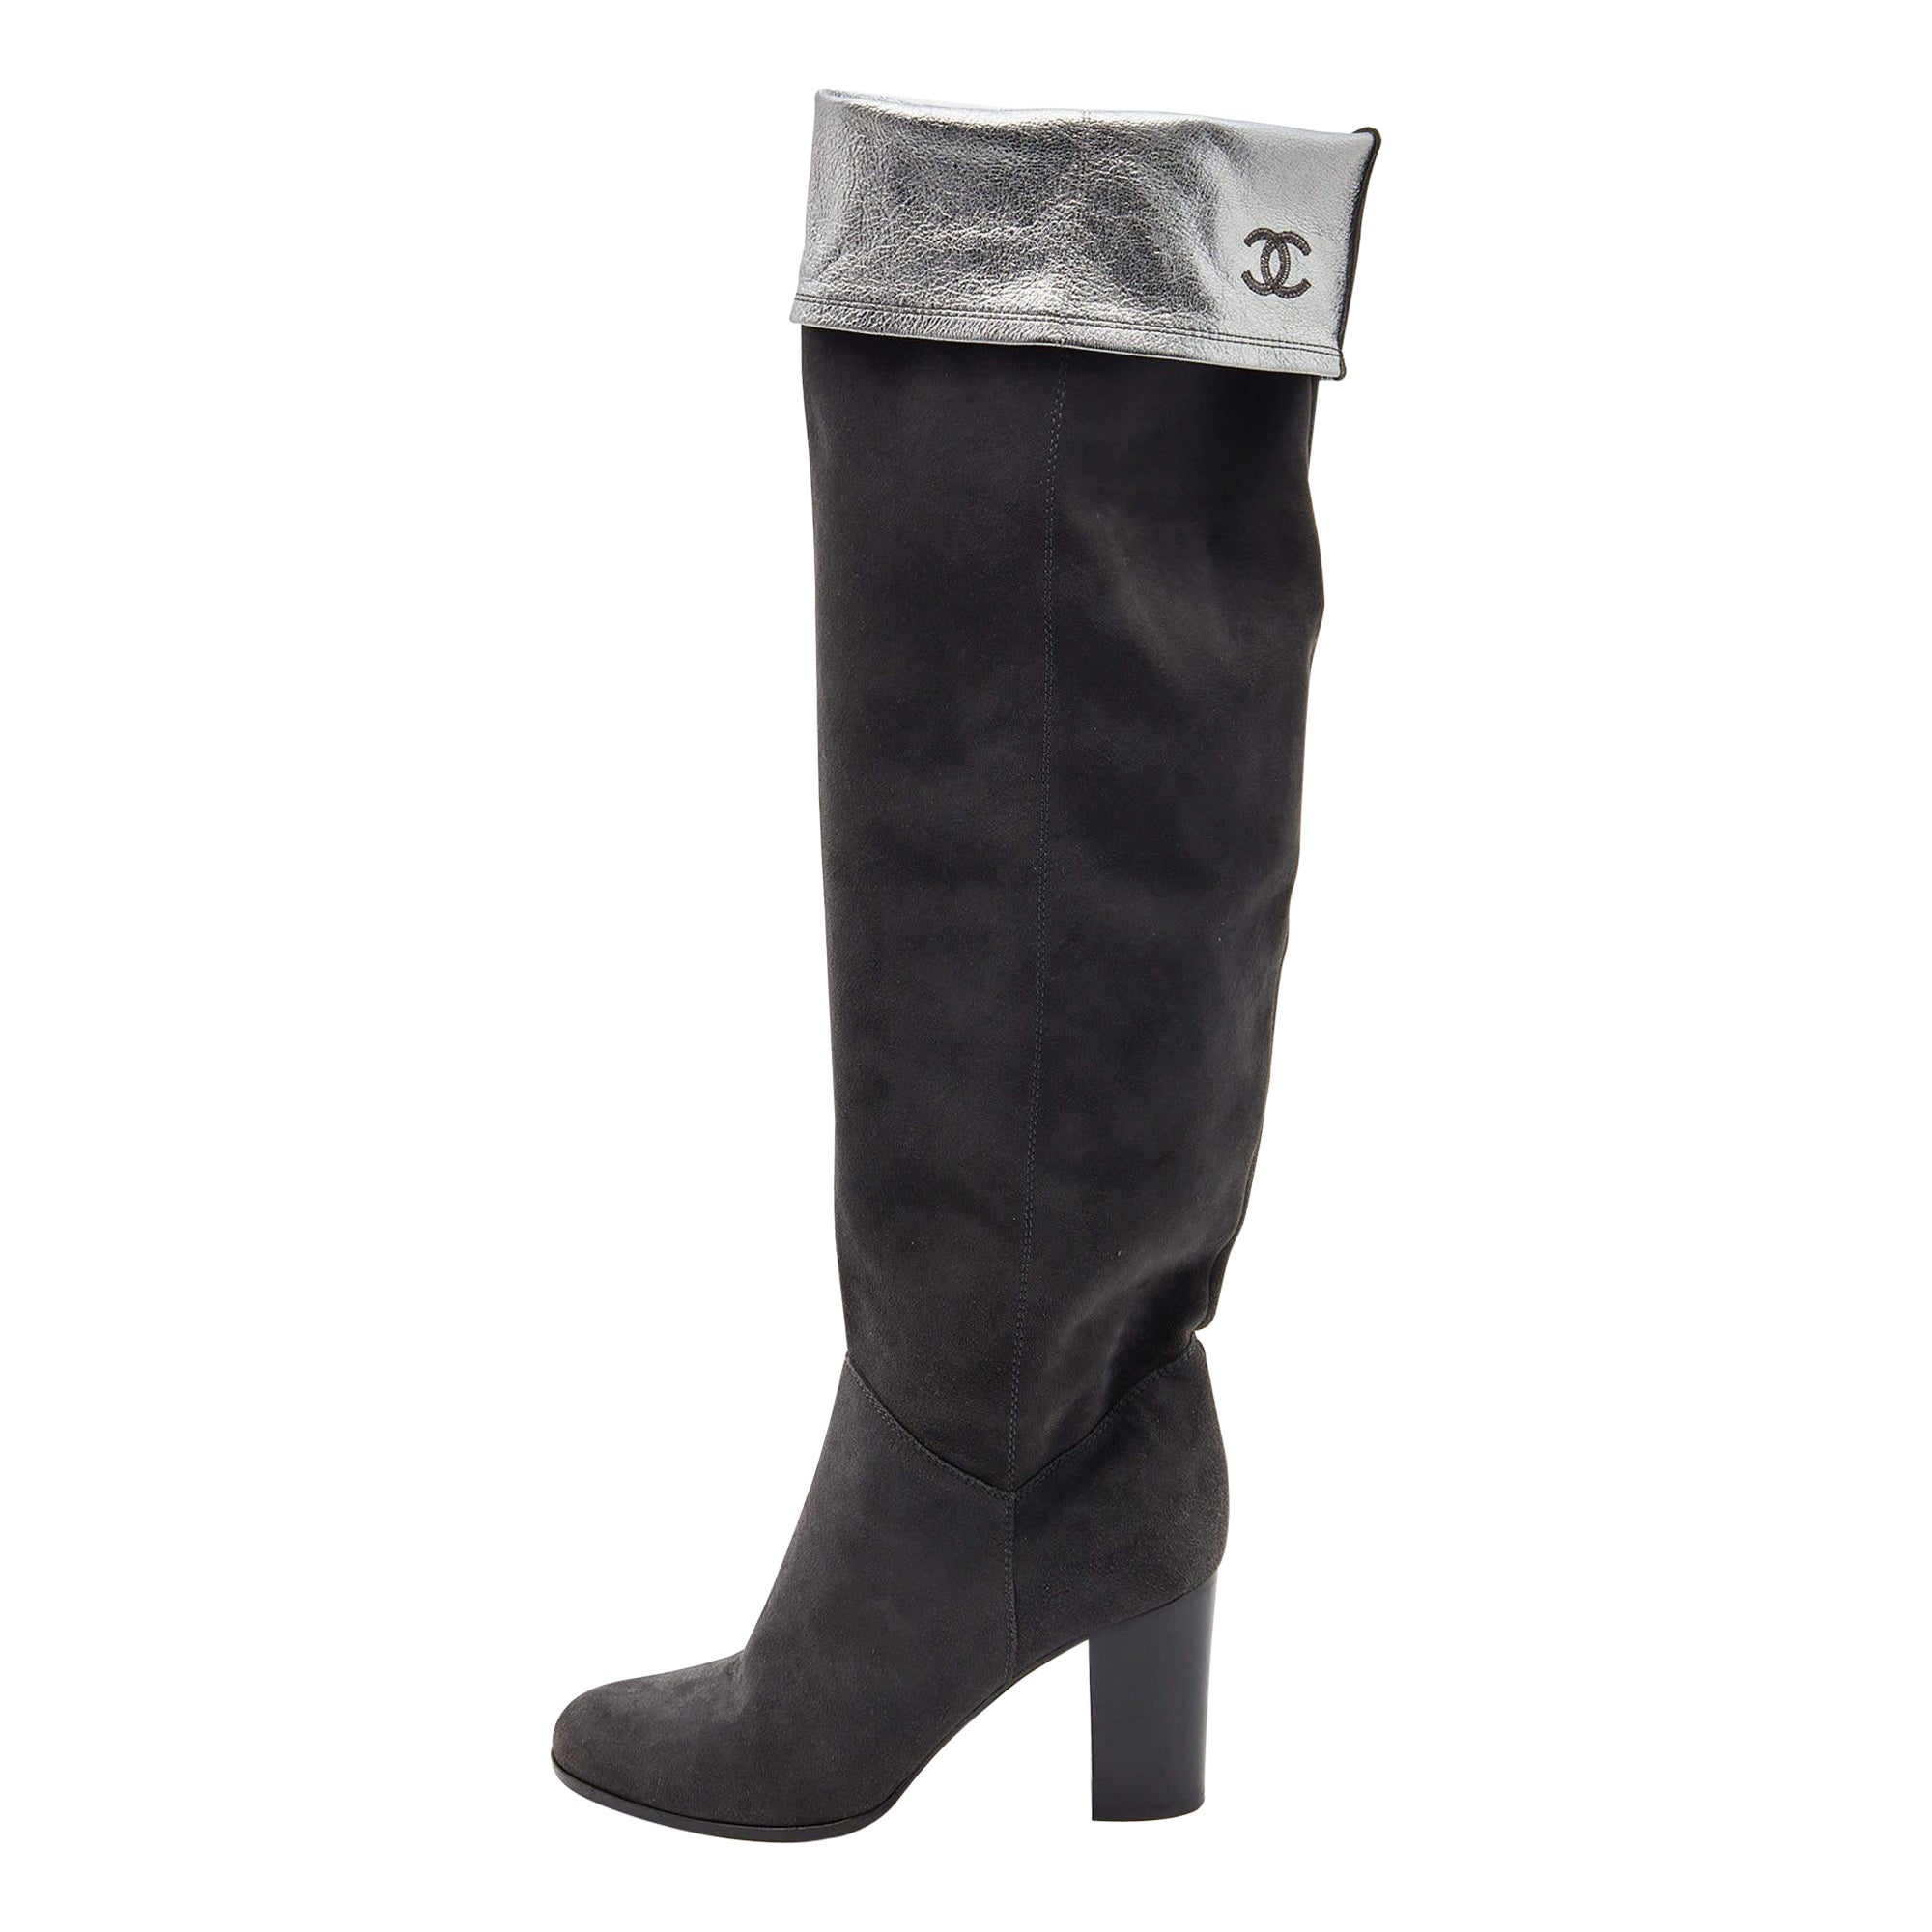 Chanel Grey Suede and Leather Knee Length Boots Size 38.5